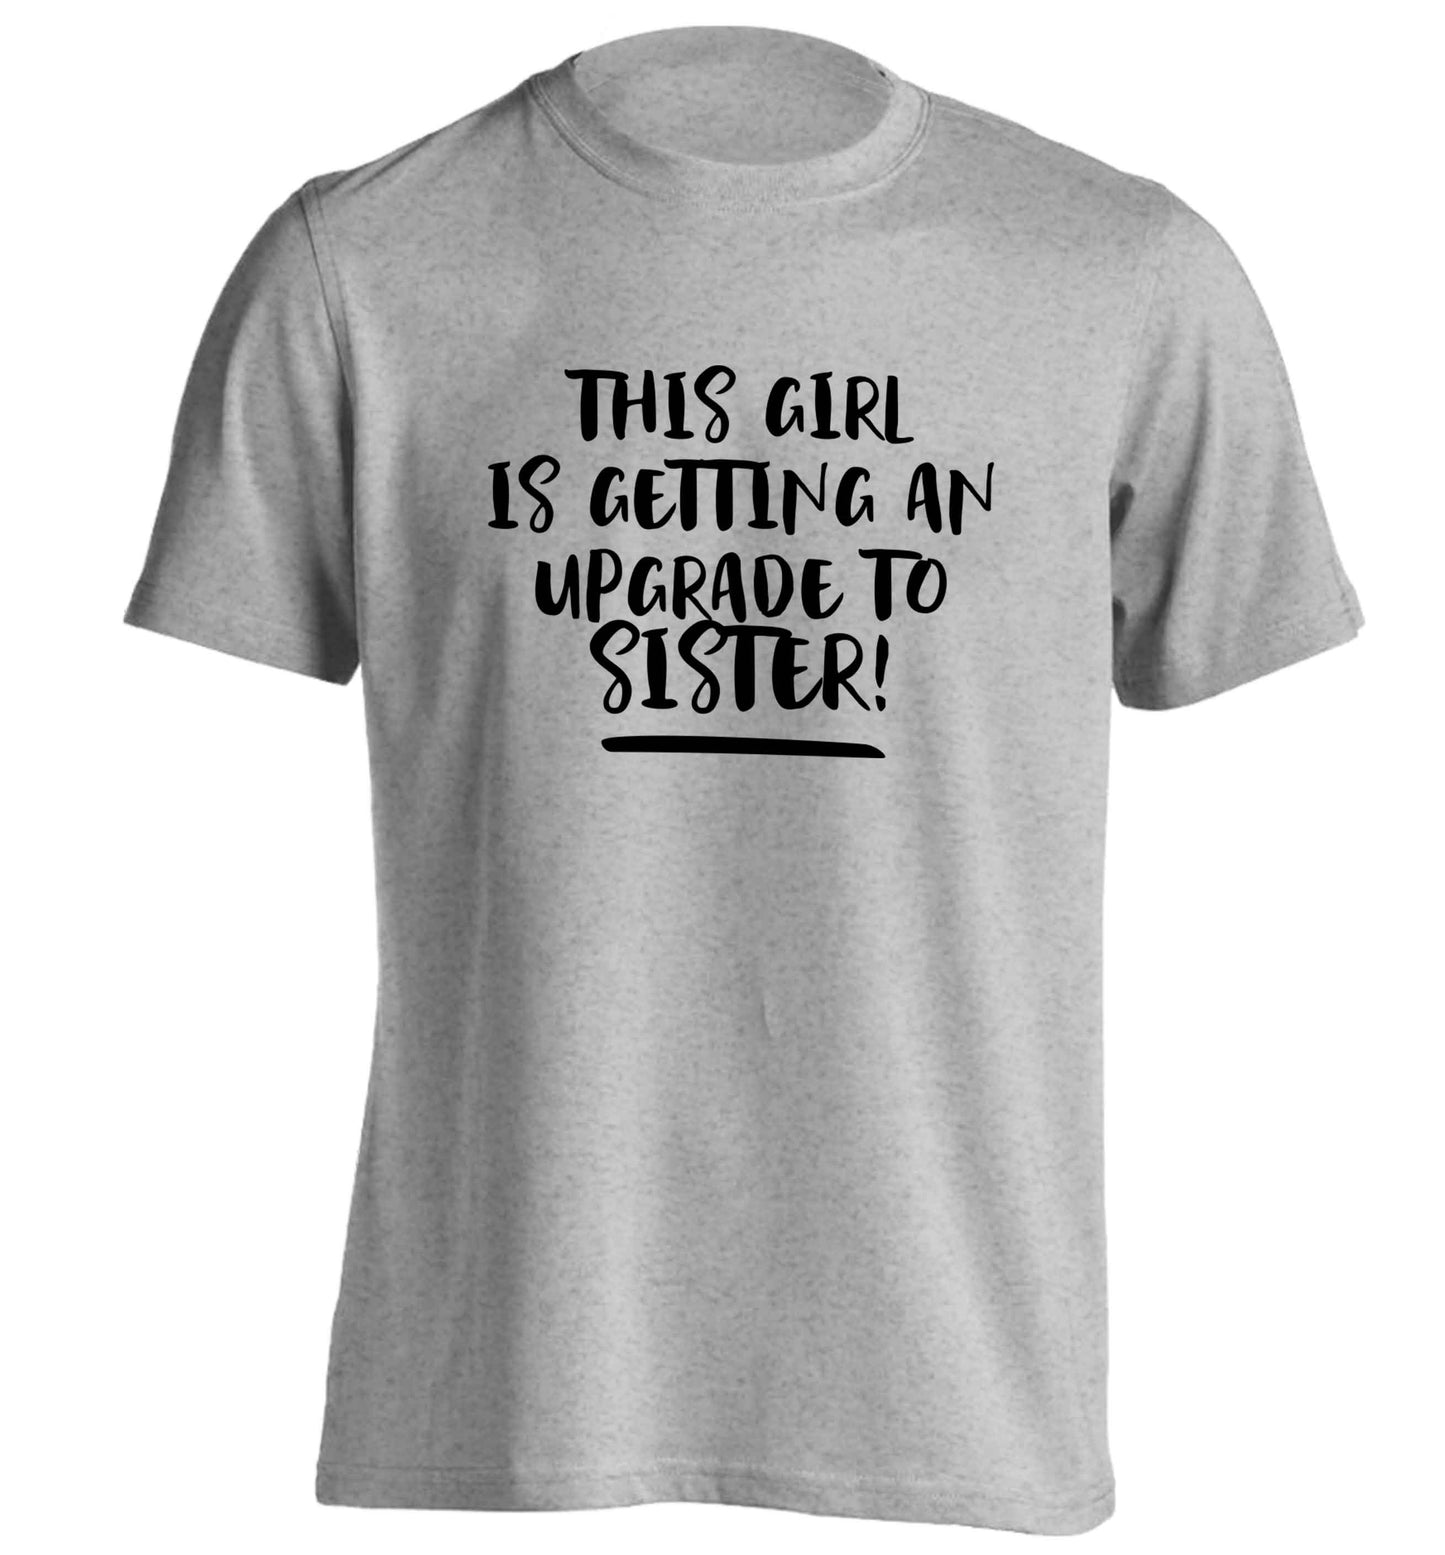 This girl is getting an upgrade to sister! adults unisex grey Tshirt 2XL